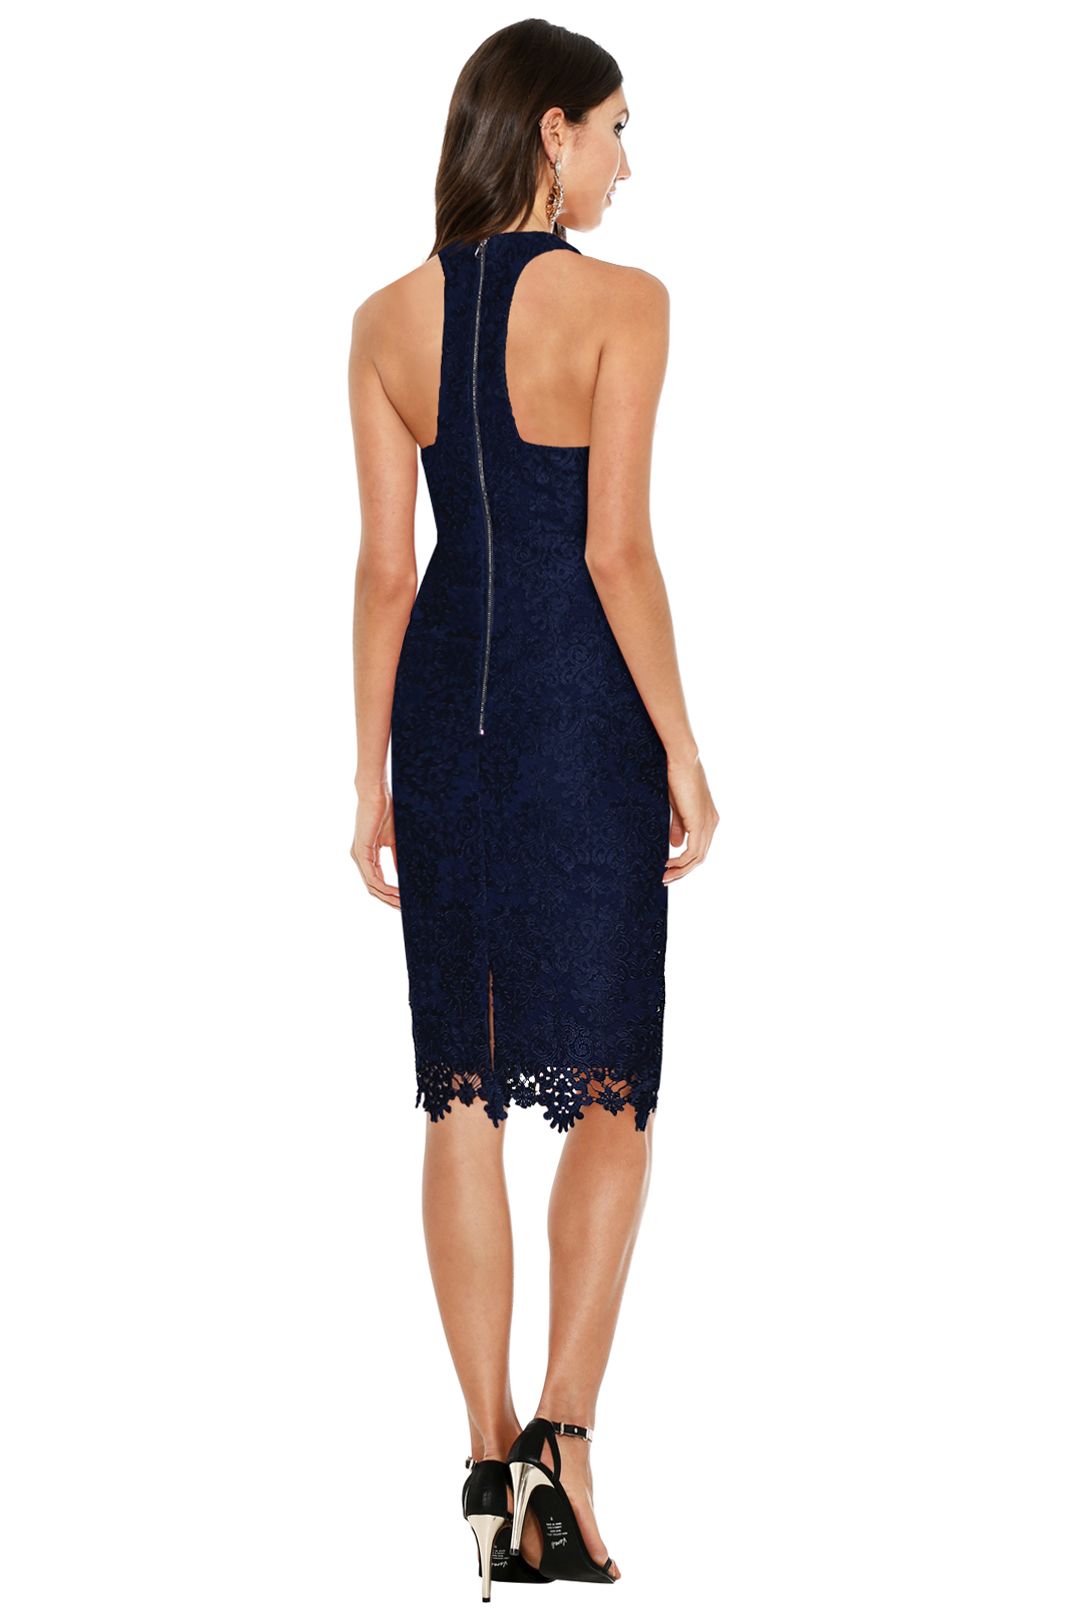 Ministry of Style - Cross Section Fitted Midi Dress - Navy - Back